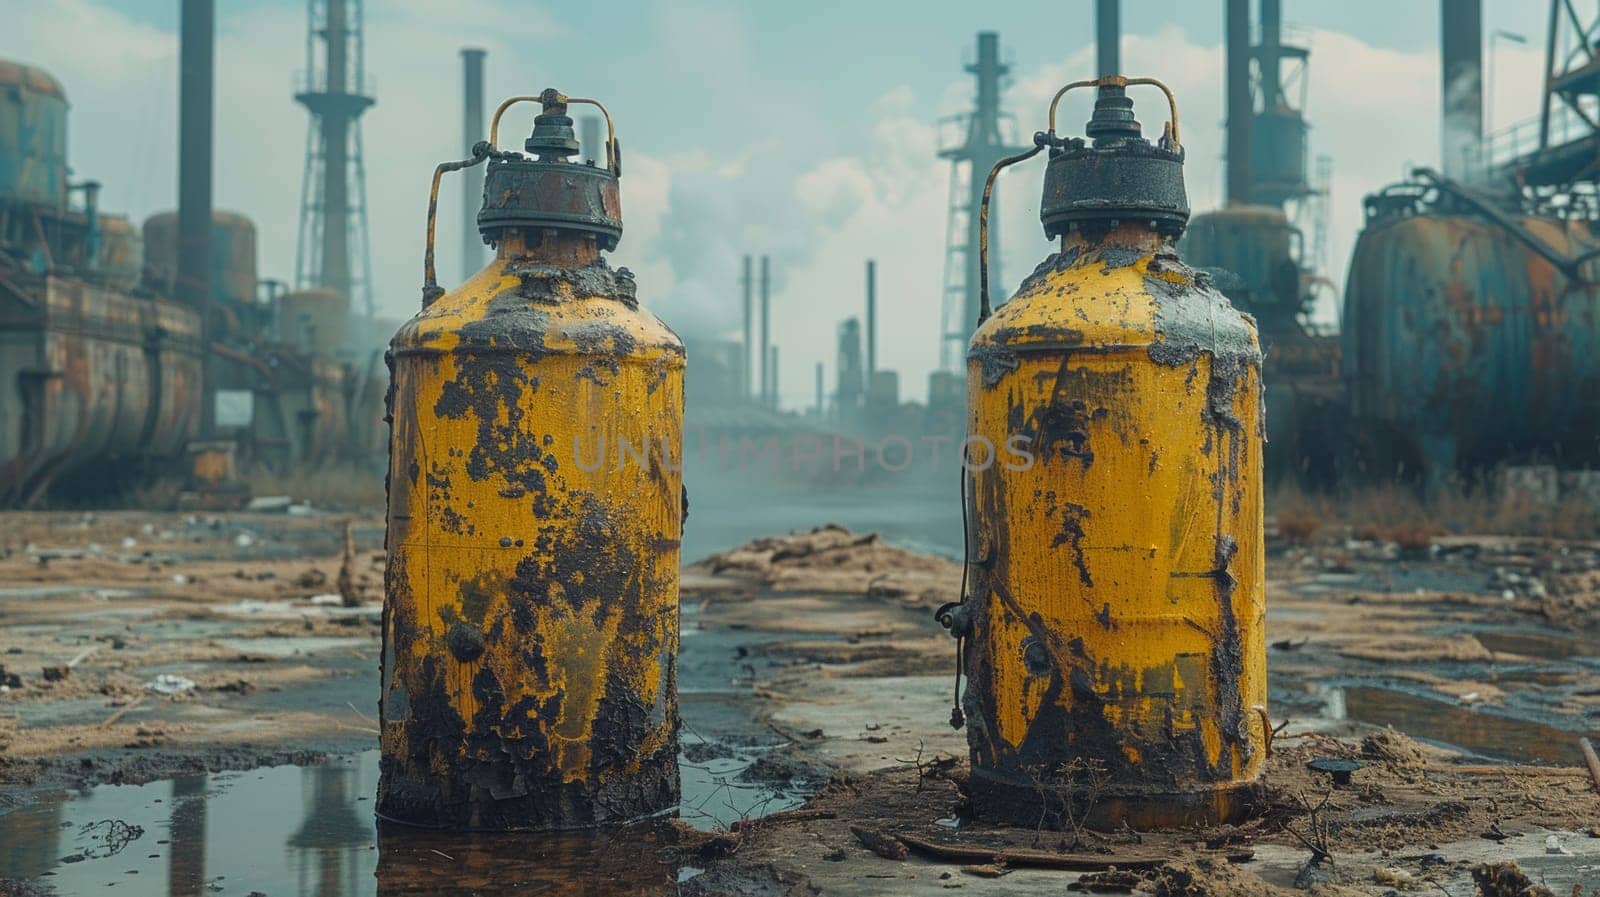 Two yellow gas cans sitting in a dirty, muddy area, AI by starush